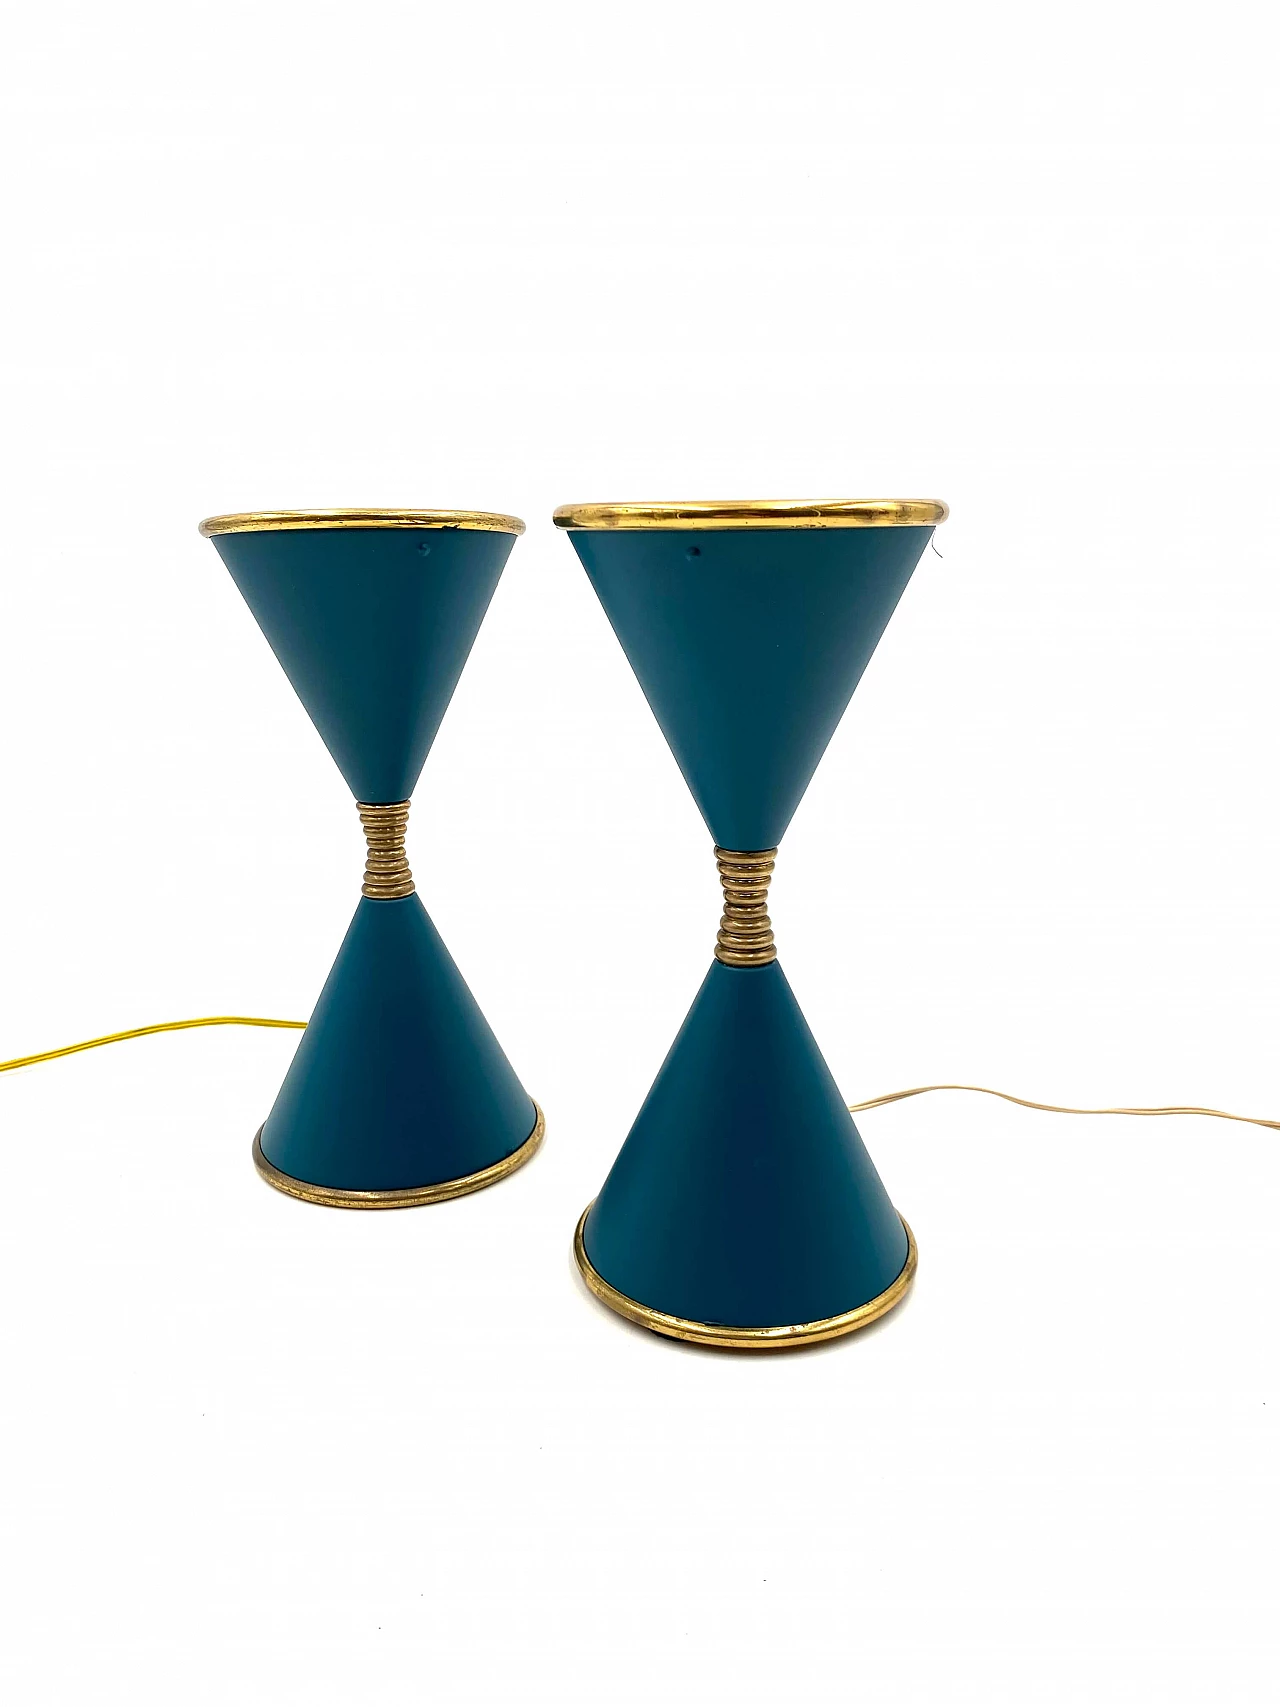 Pair of Clessidra lamps by Angelo Lelii for Arredoluce, 1960s 1201458